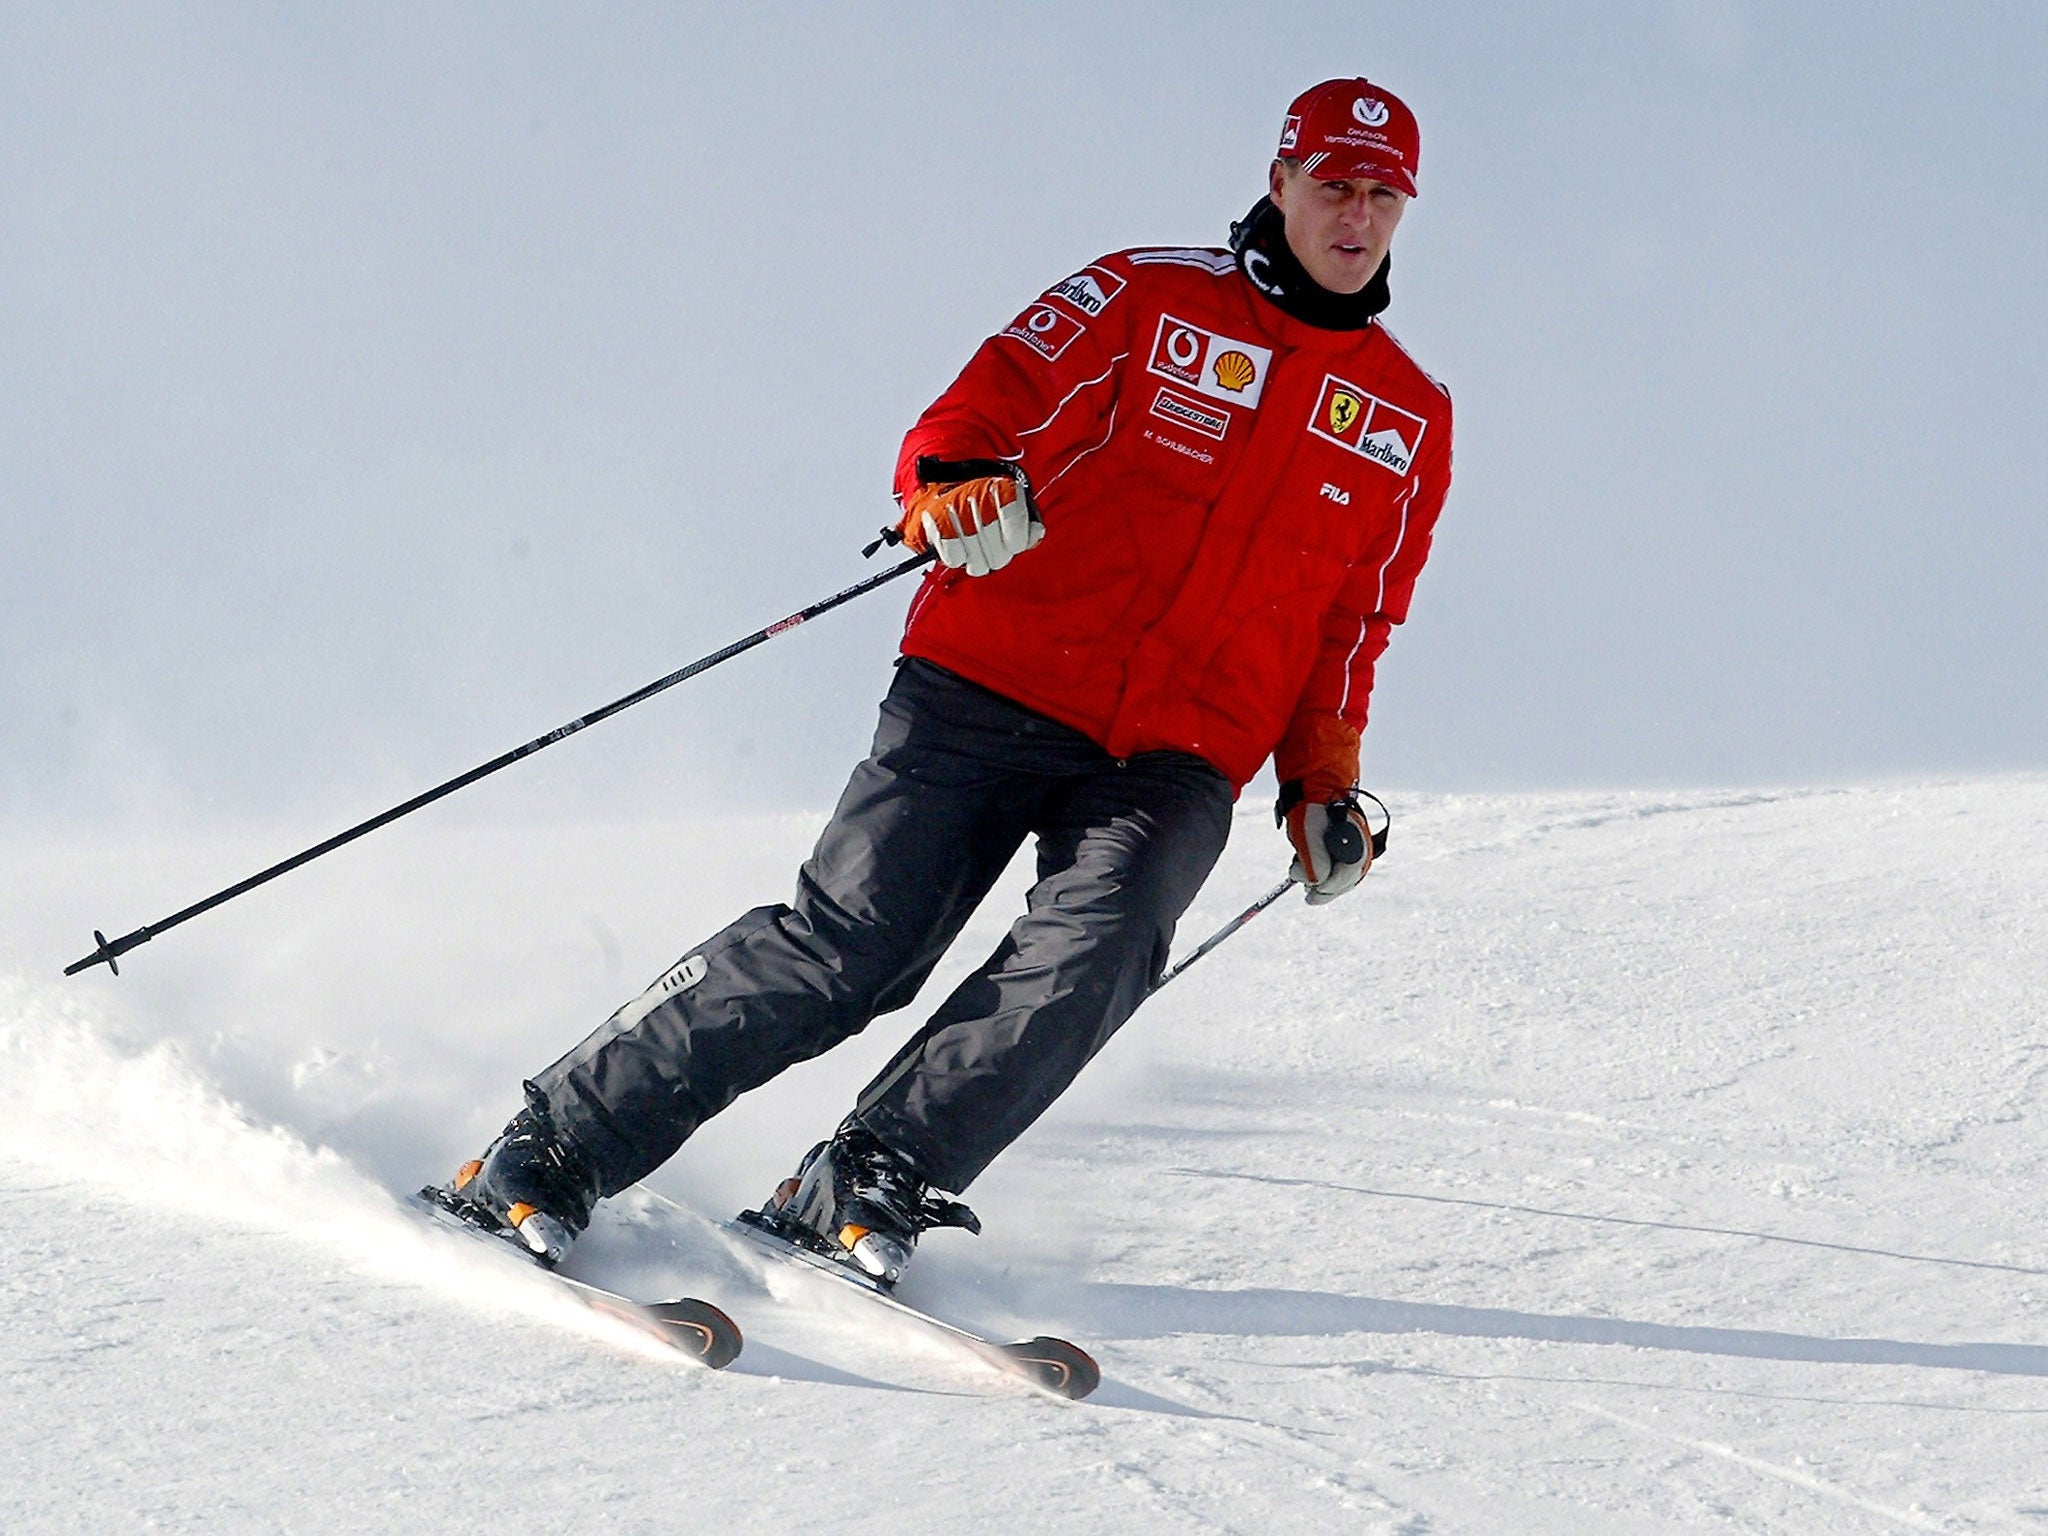 Michael Schumacher skiing in Madonna di Campiglio, Northern Italy, in 2004